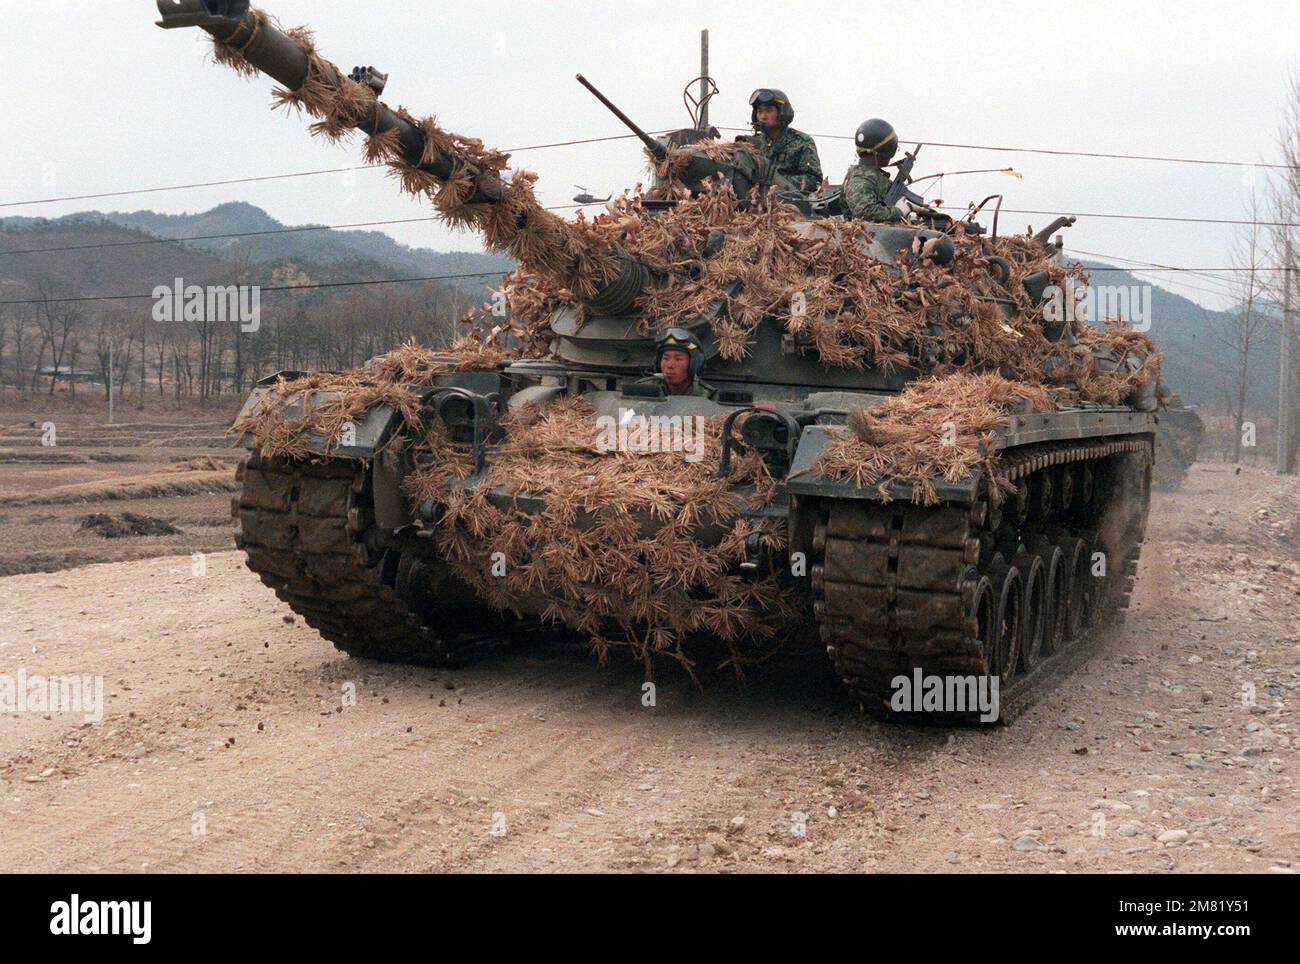 A heavily camouflaged M-48 main battle tank moves down the road with Korean soldiers aboard during the joint South Korean/US Exercise Team Spirit '84. Subject Operation/Series: Team Spirit '84 Country: Republic Of Korea (KOR) Stock Photo